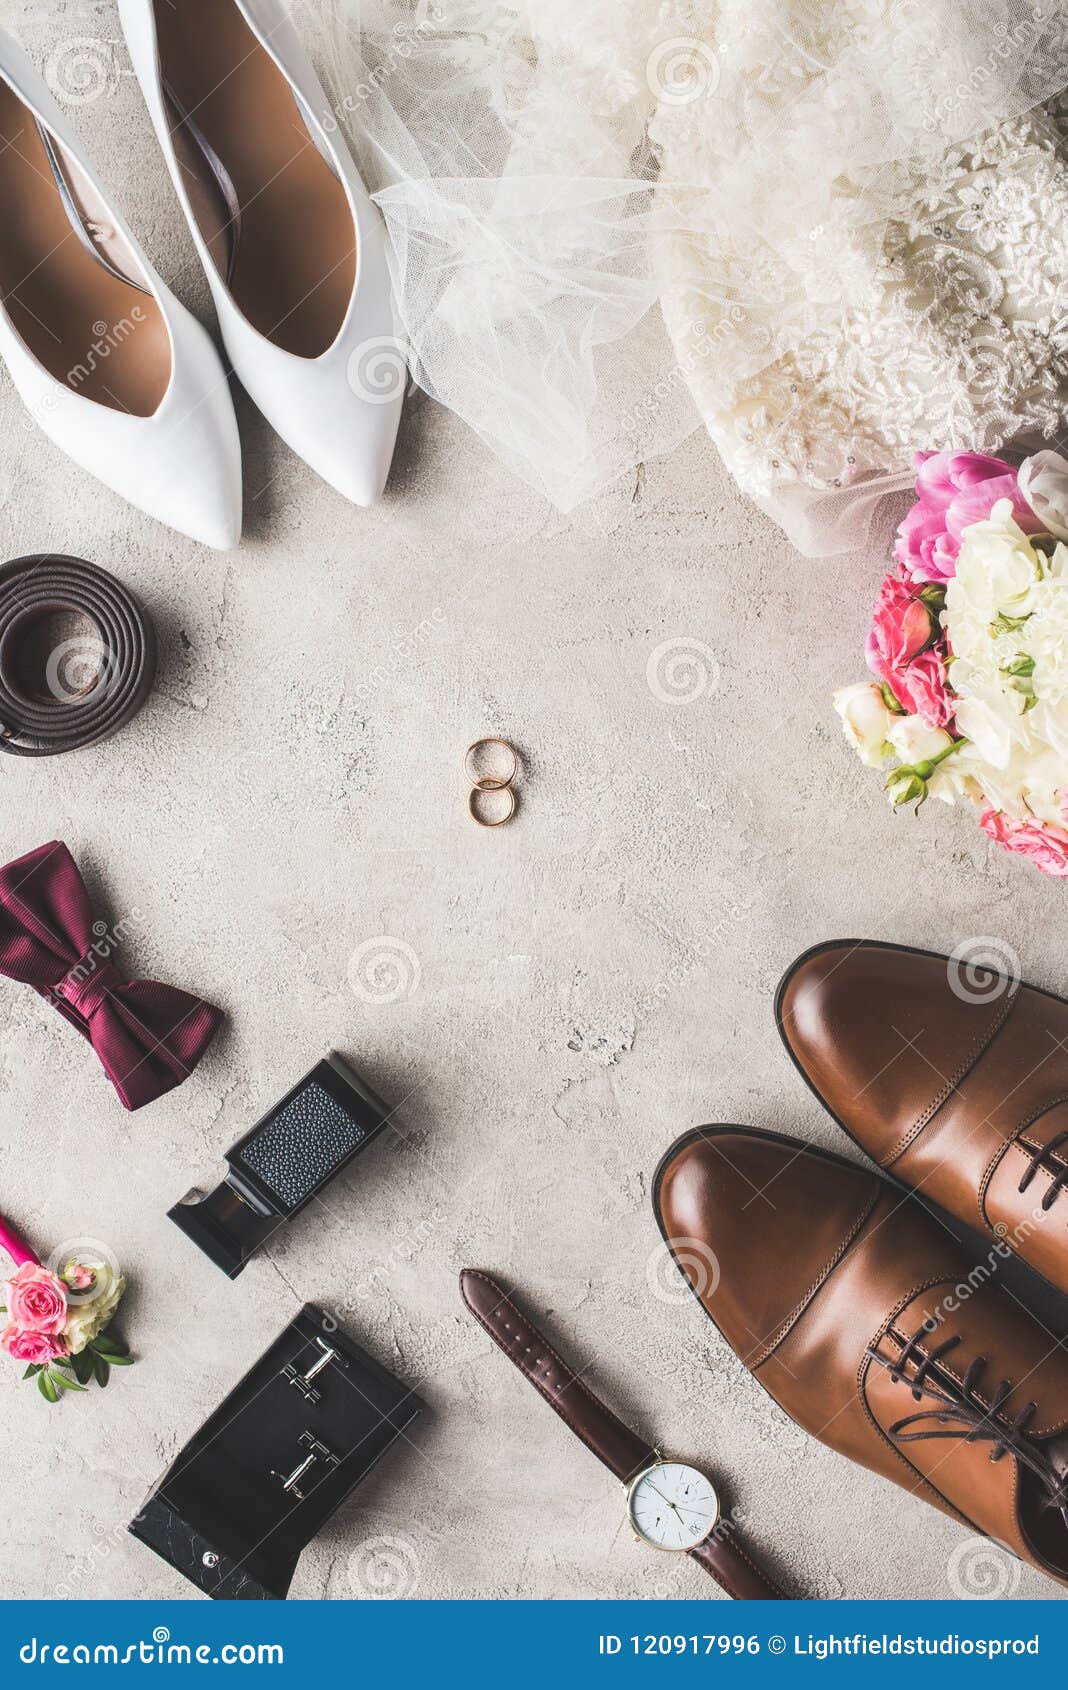 Top View of Wedding Accessories and Rings Stock Photo - Image of ...